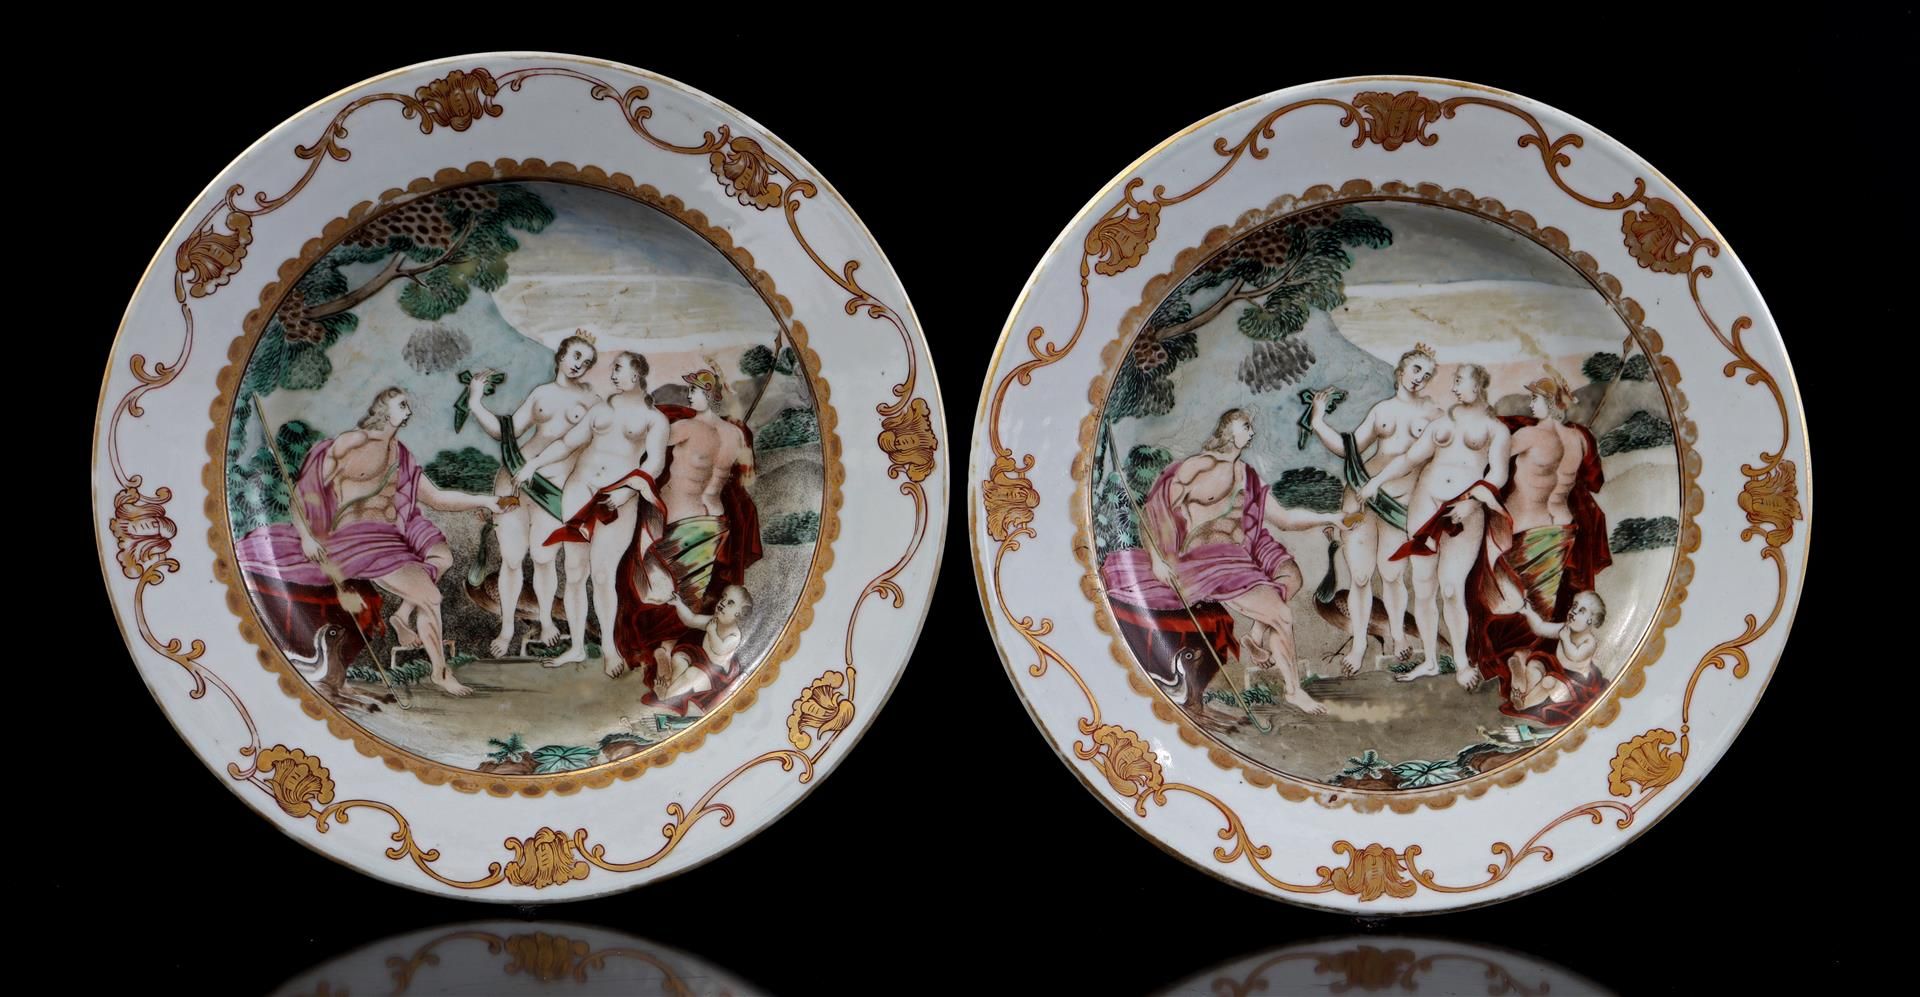 2 porcelain dishes with classic decor